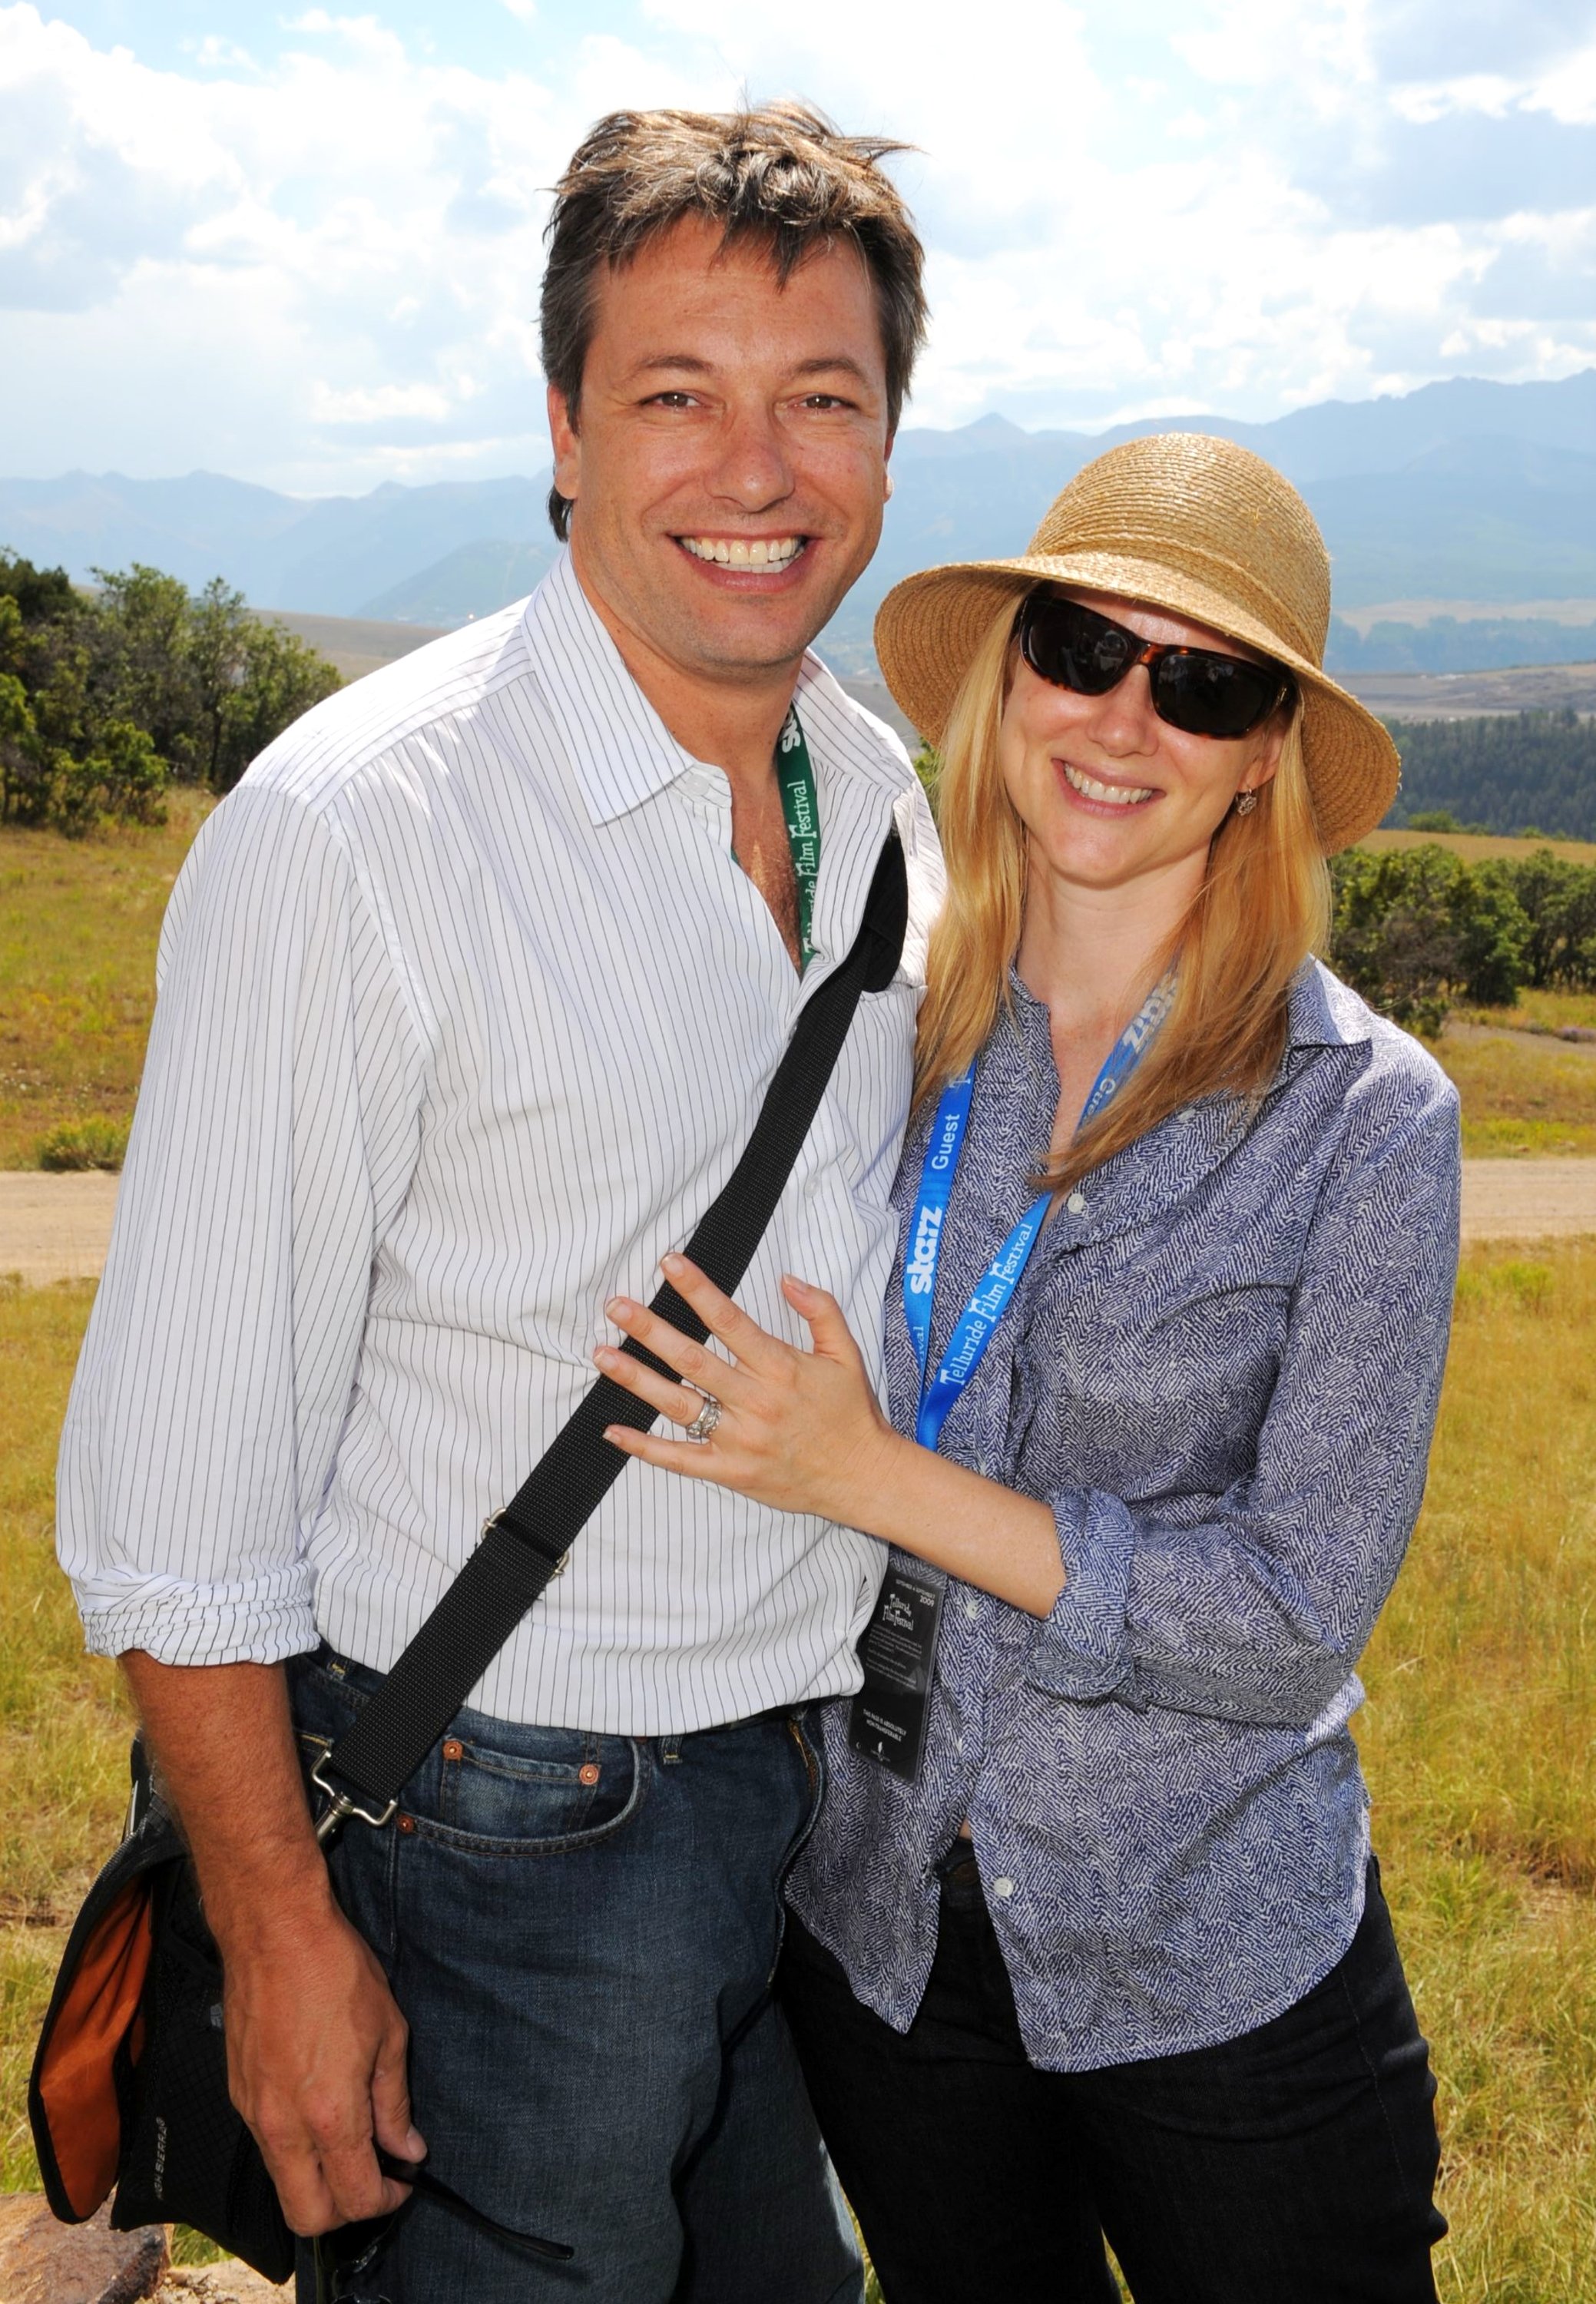 Actress Laura Linney and husband Marc Schauer attend the Patronâs Brunch during the 36th Telluride Film Festival held at the Opera House on September 4, 2009 in Telluride, Colorado | Source: Getty Images